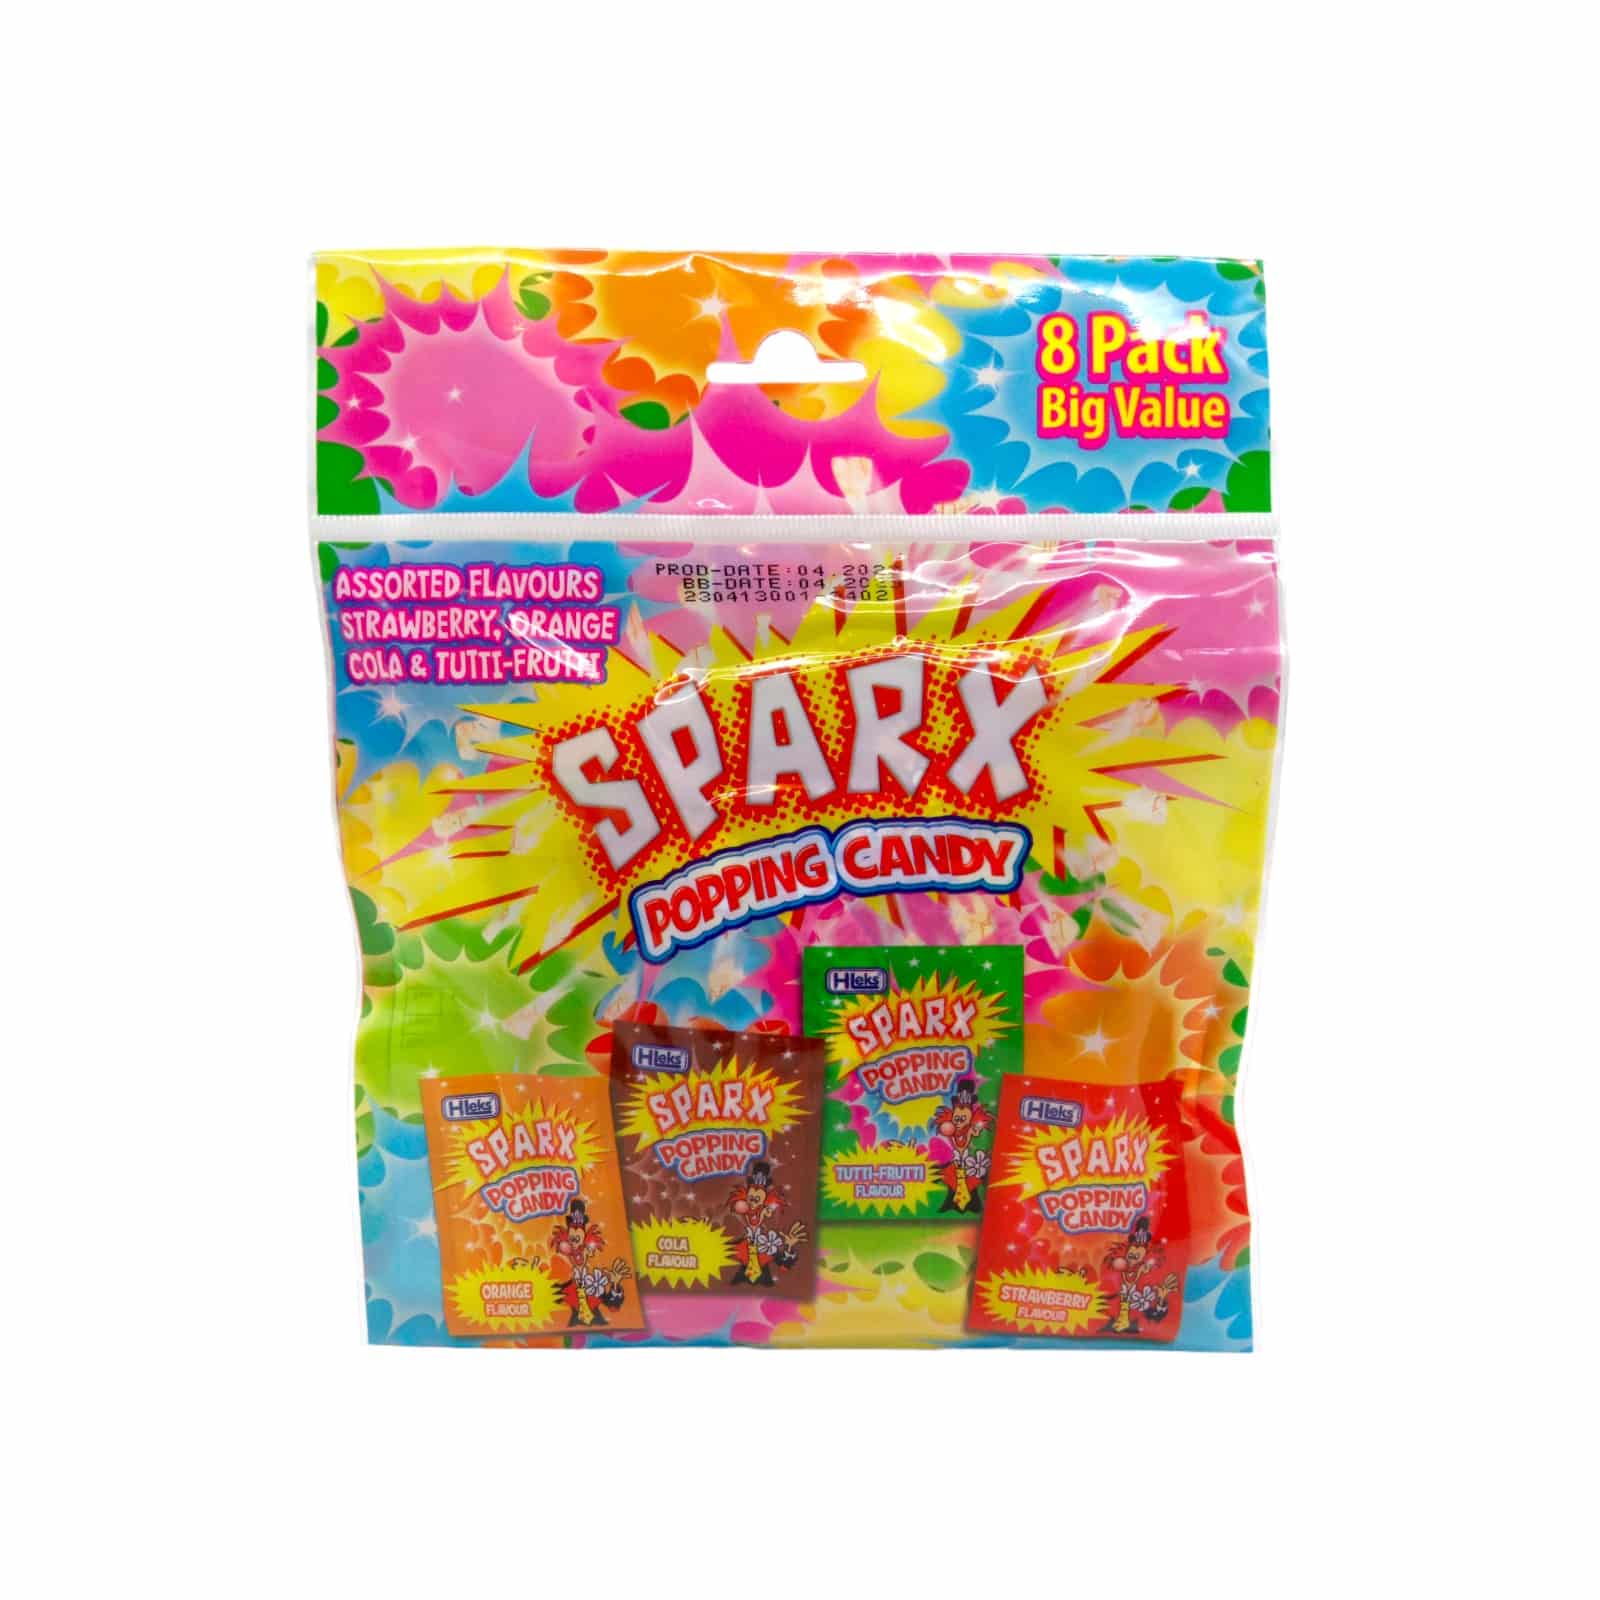 Sparx Popping Candy 40g